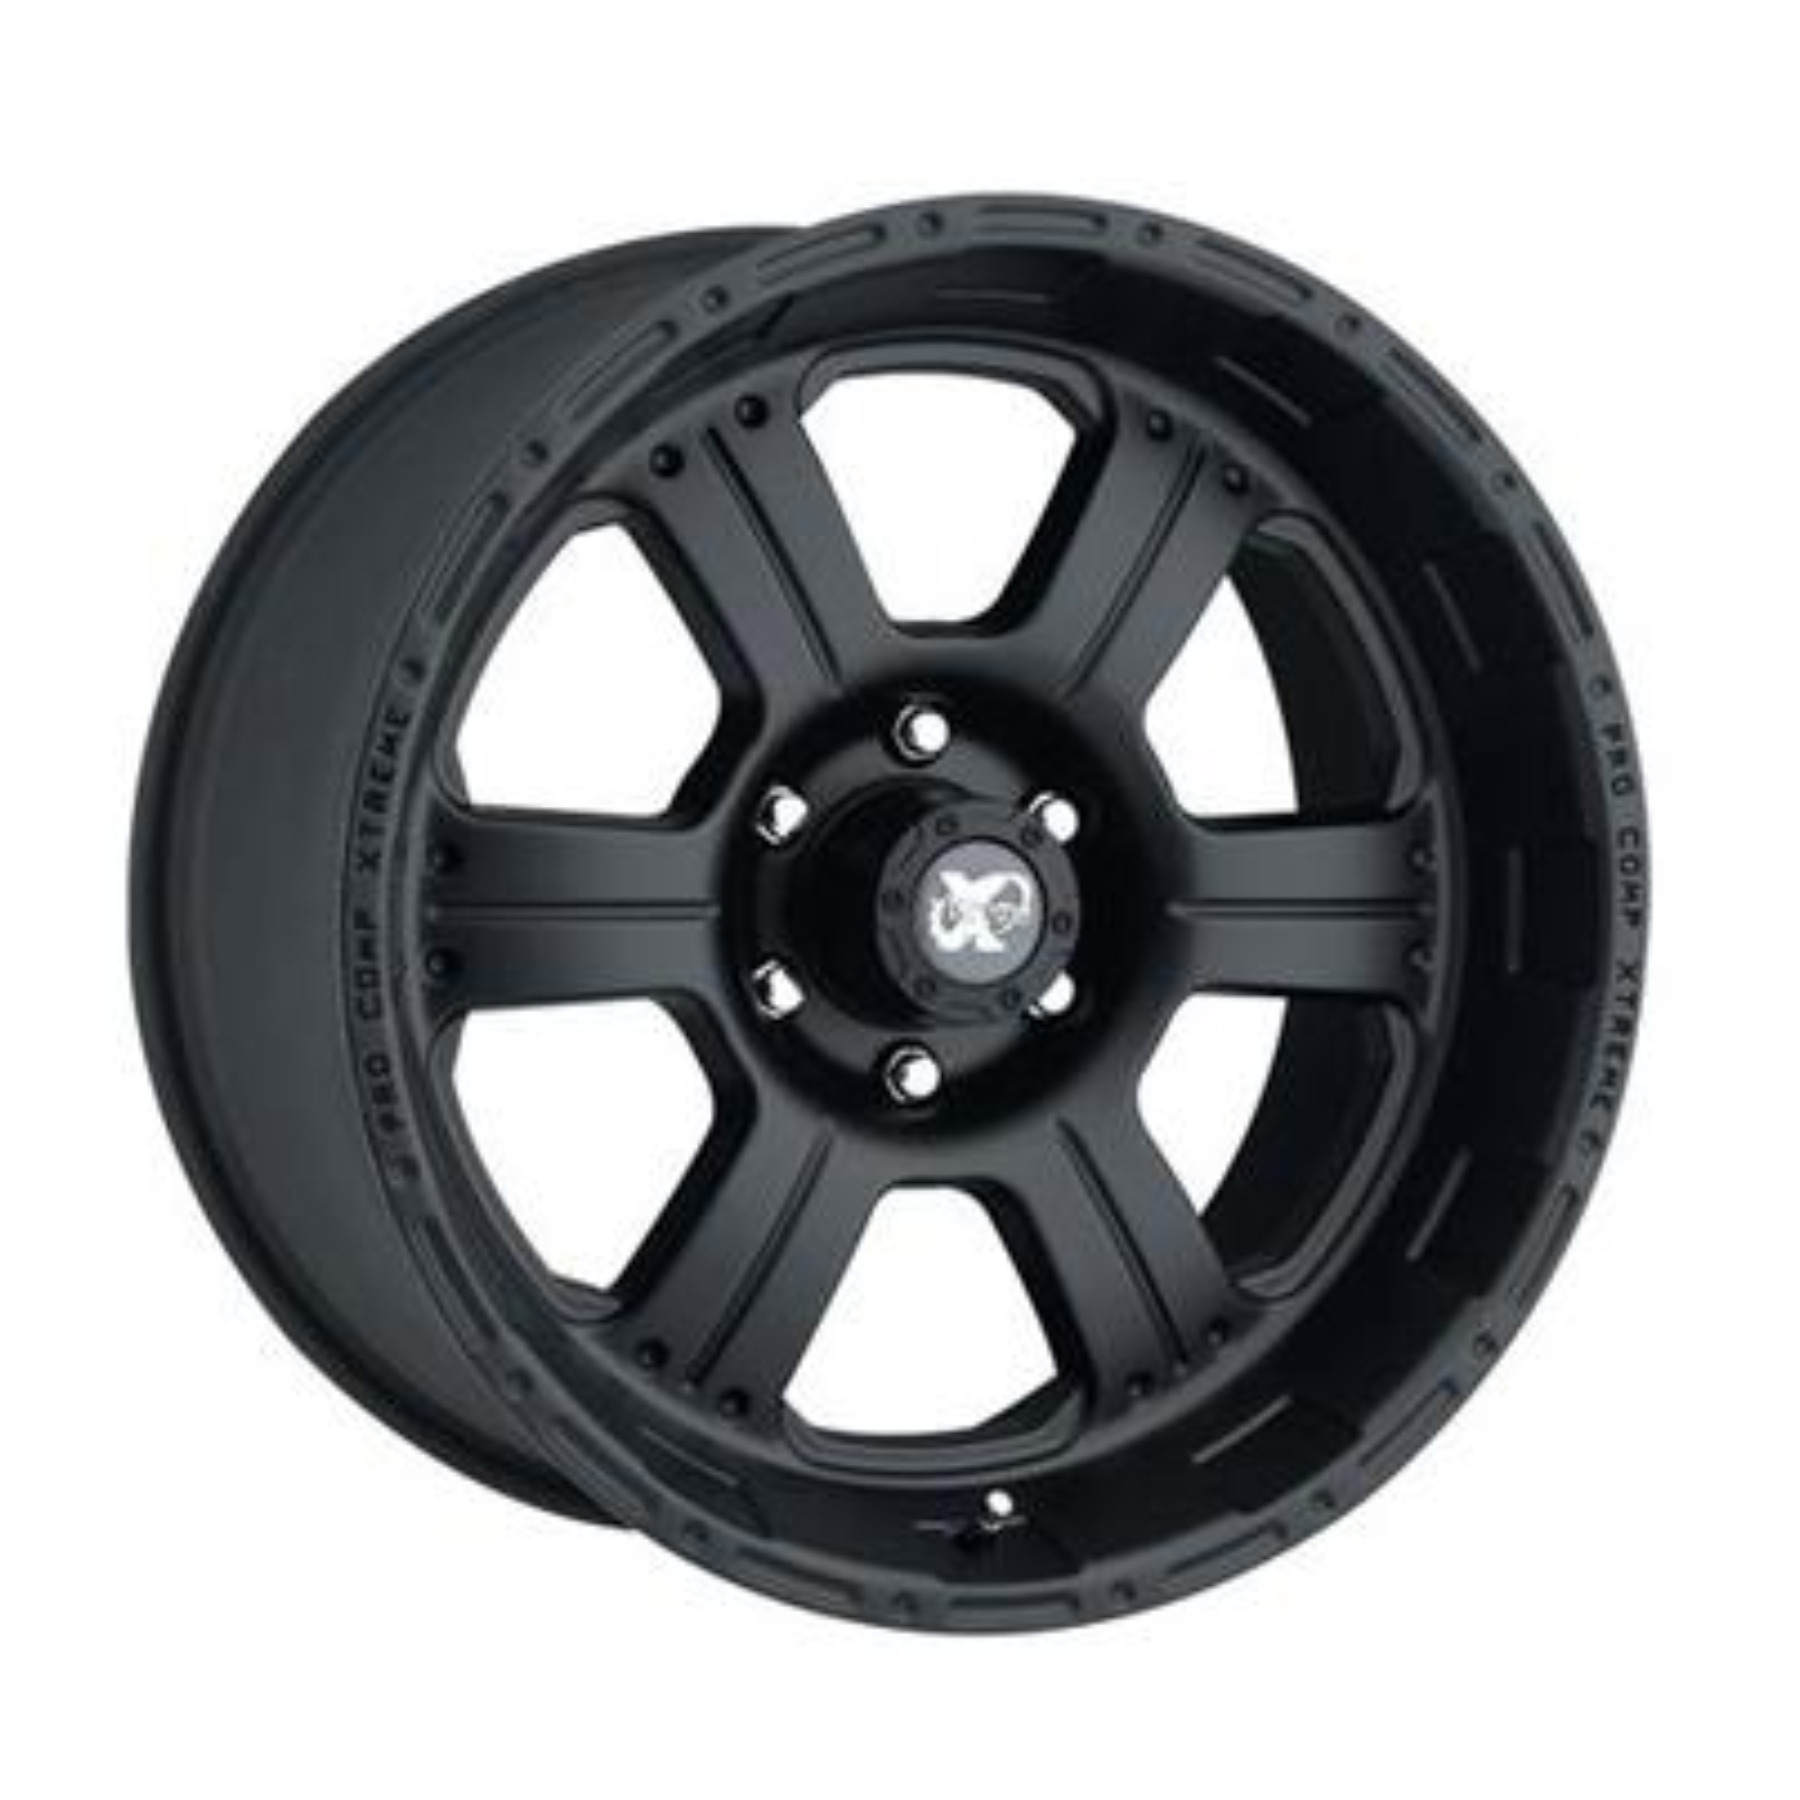 Series 7089, 18x9 with 5 on 5 Bolt Pattern - Flat Black